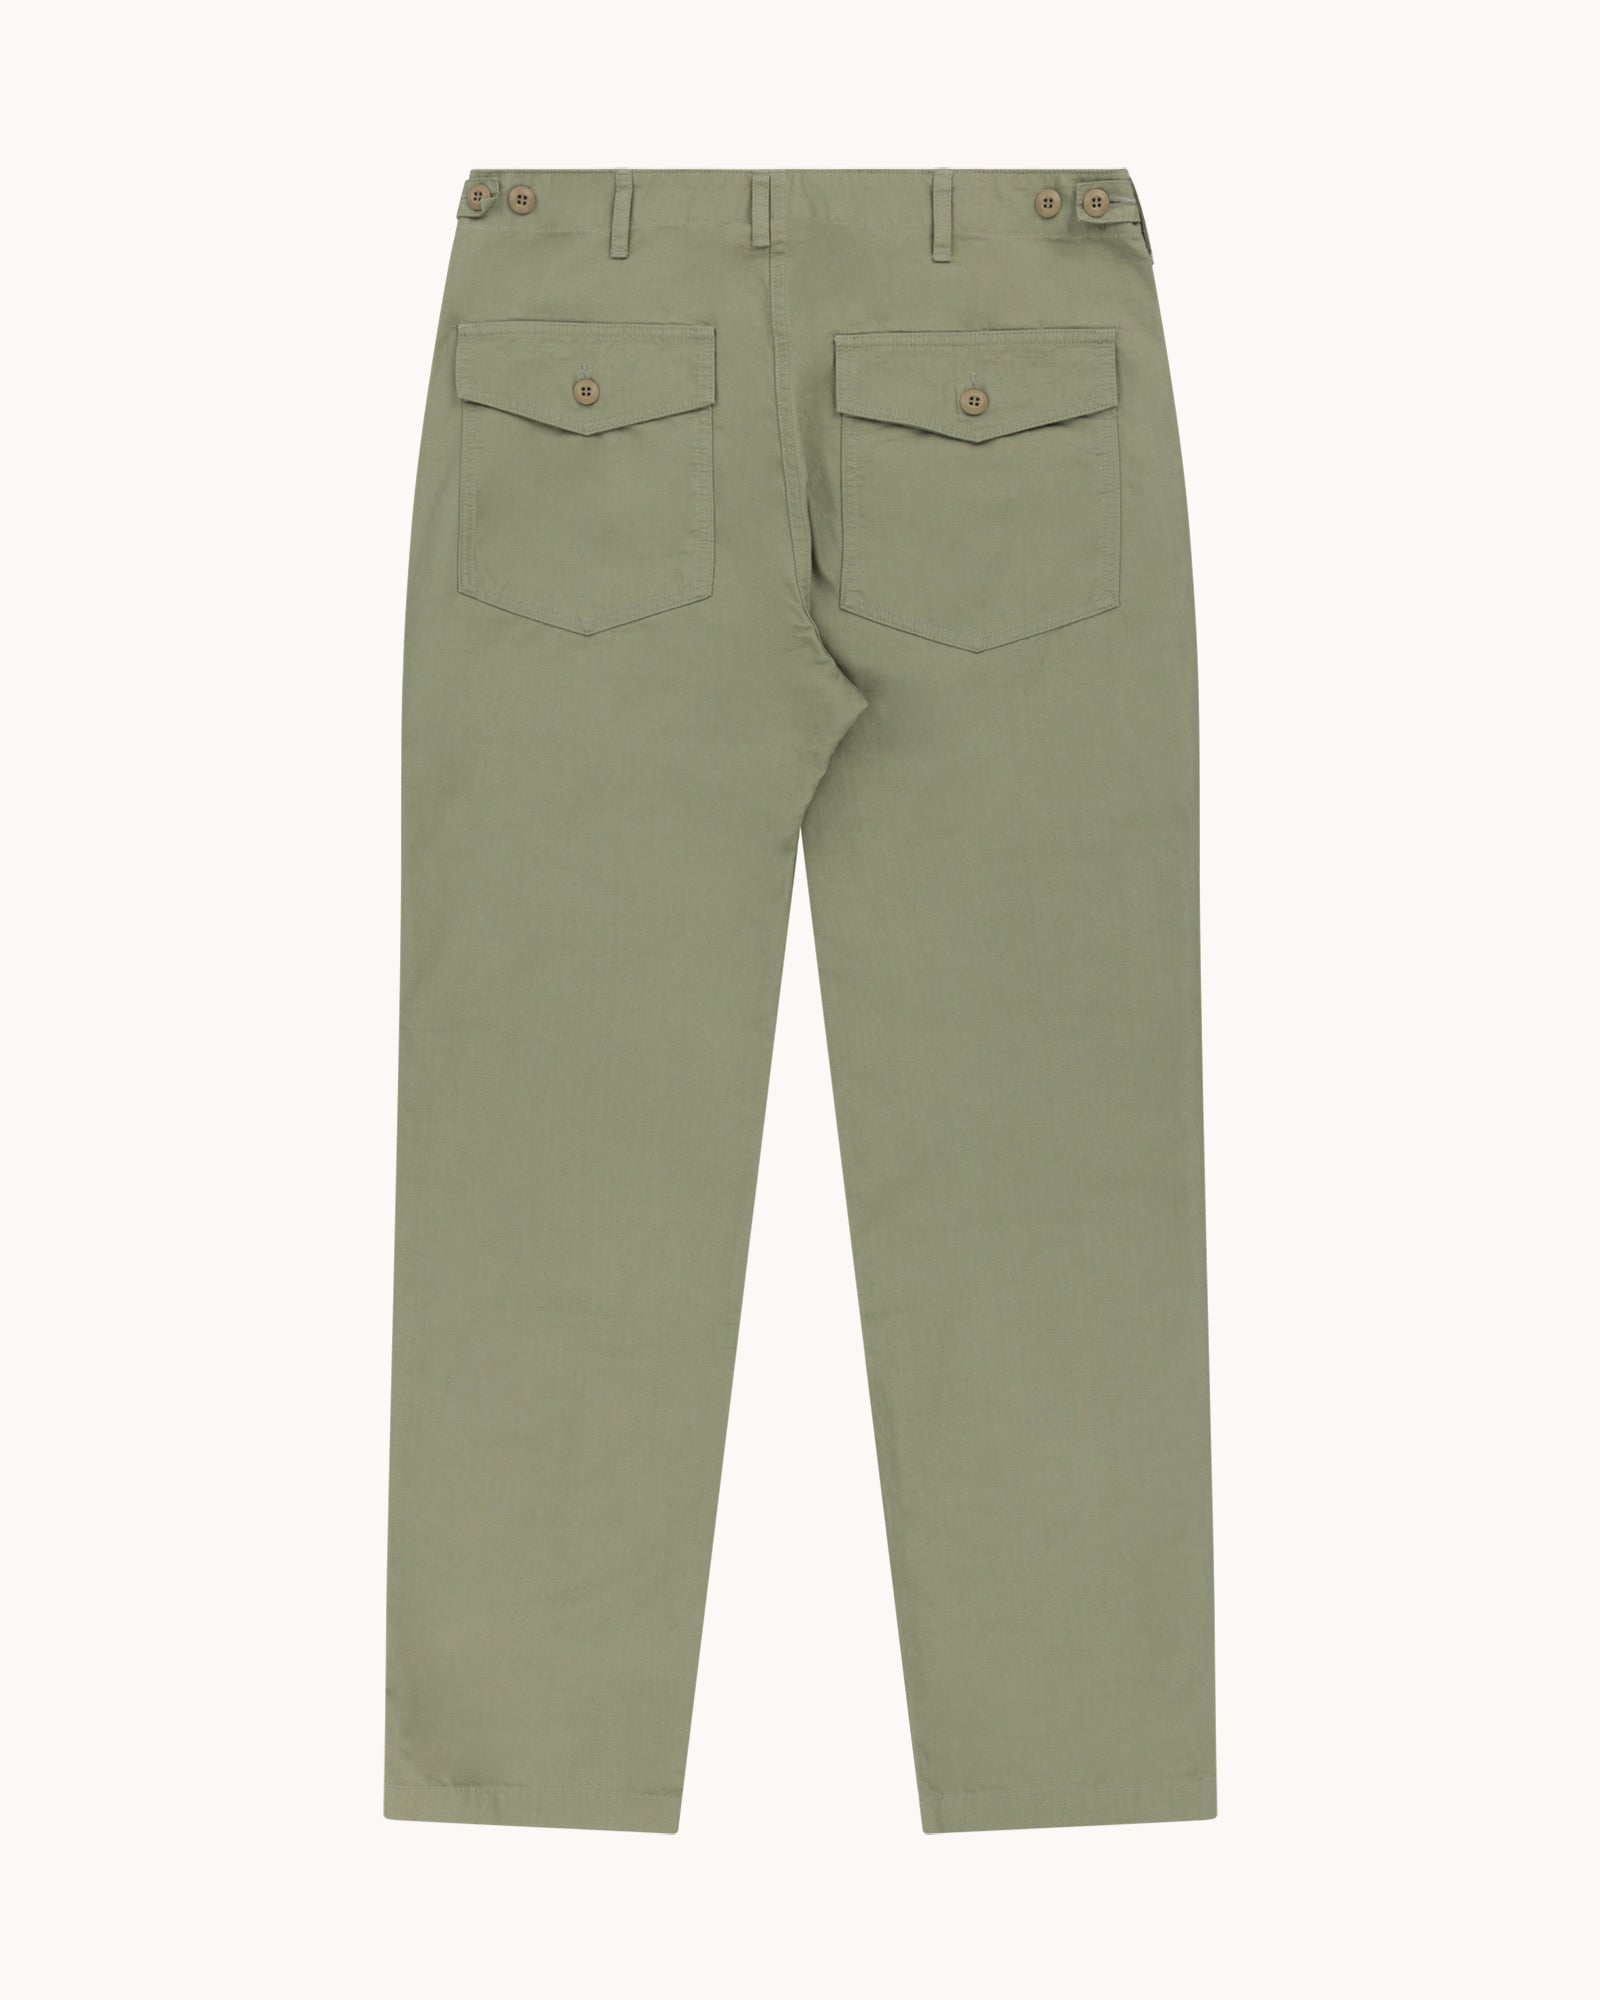 High Rise Japanese Ripstop Fatigue Pant - Light Olive Green